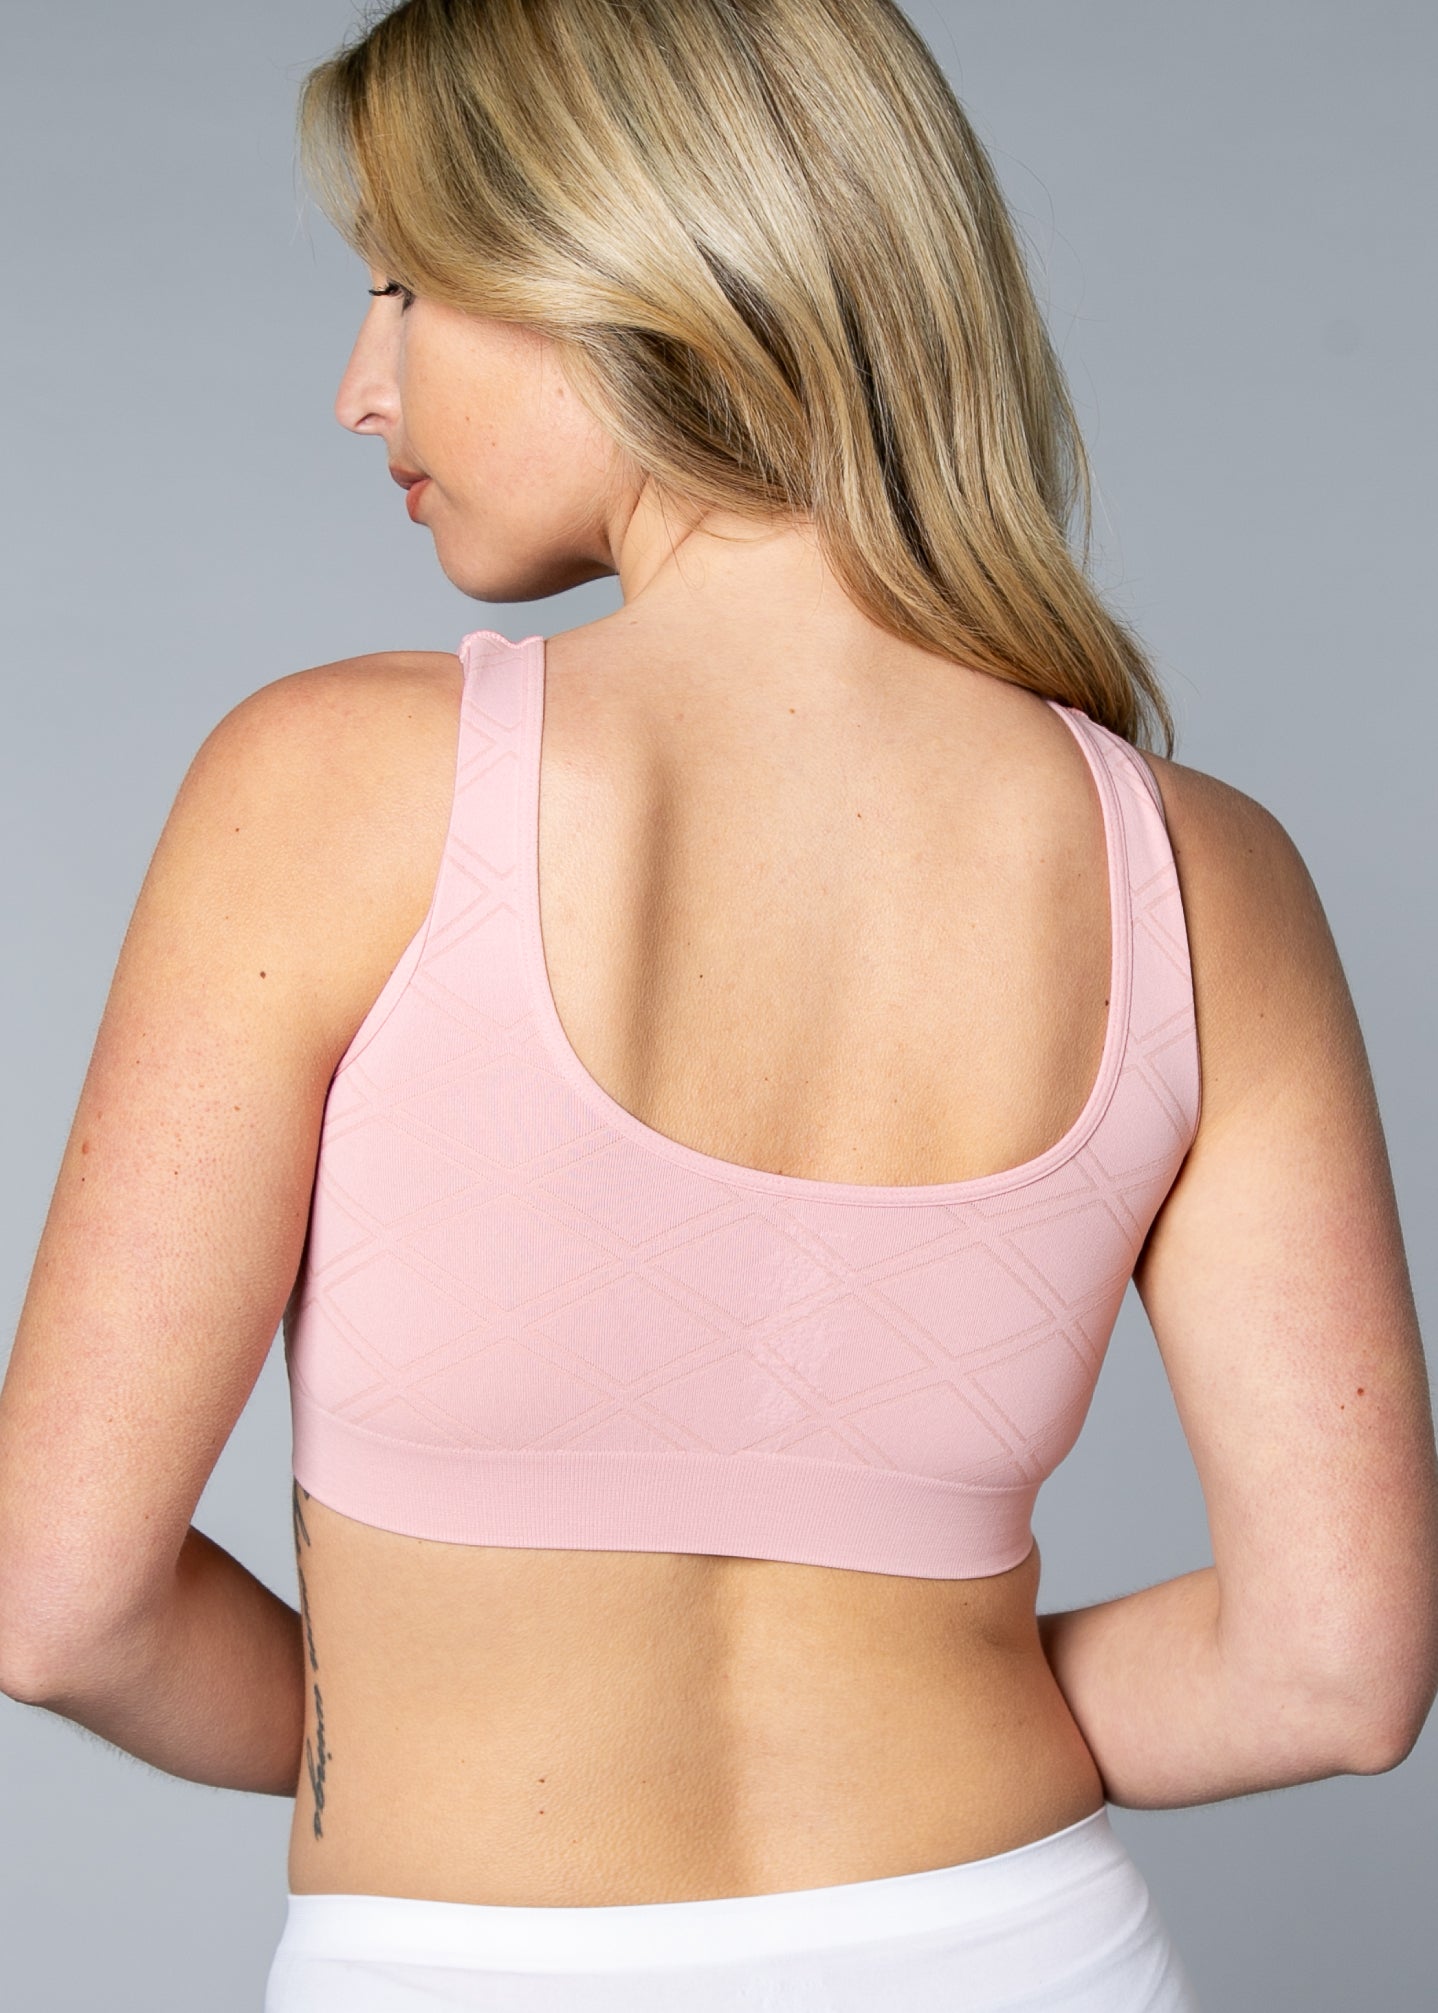 Made from jacquard stretch fabric, this seamless racerback bra